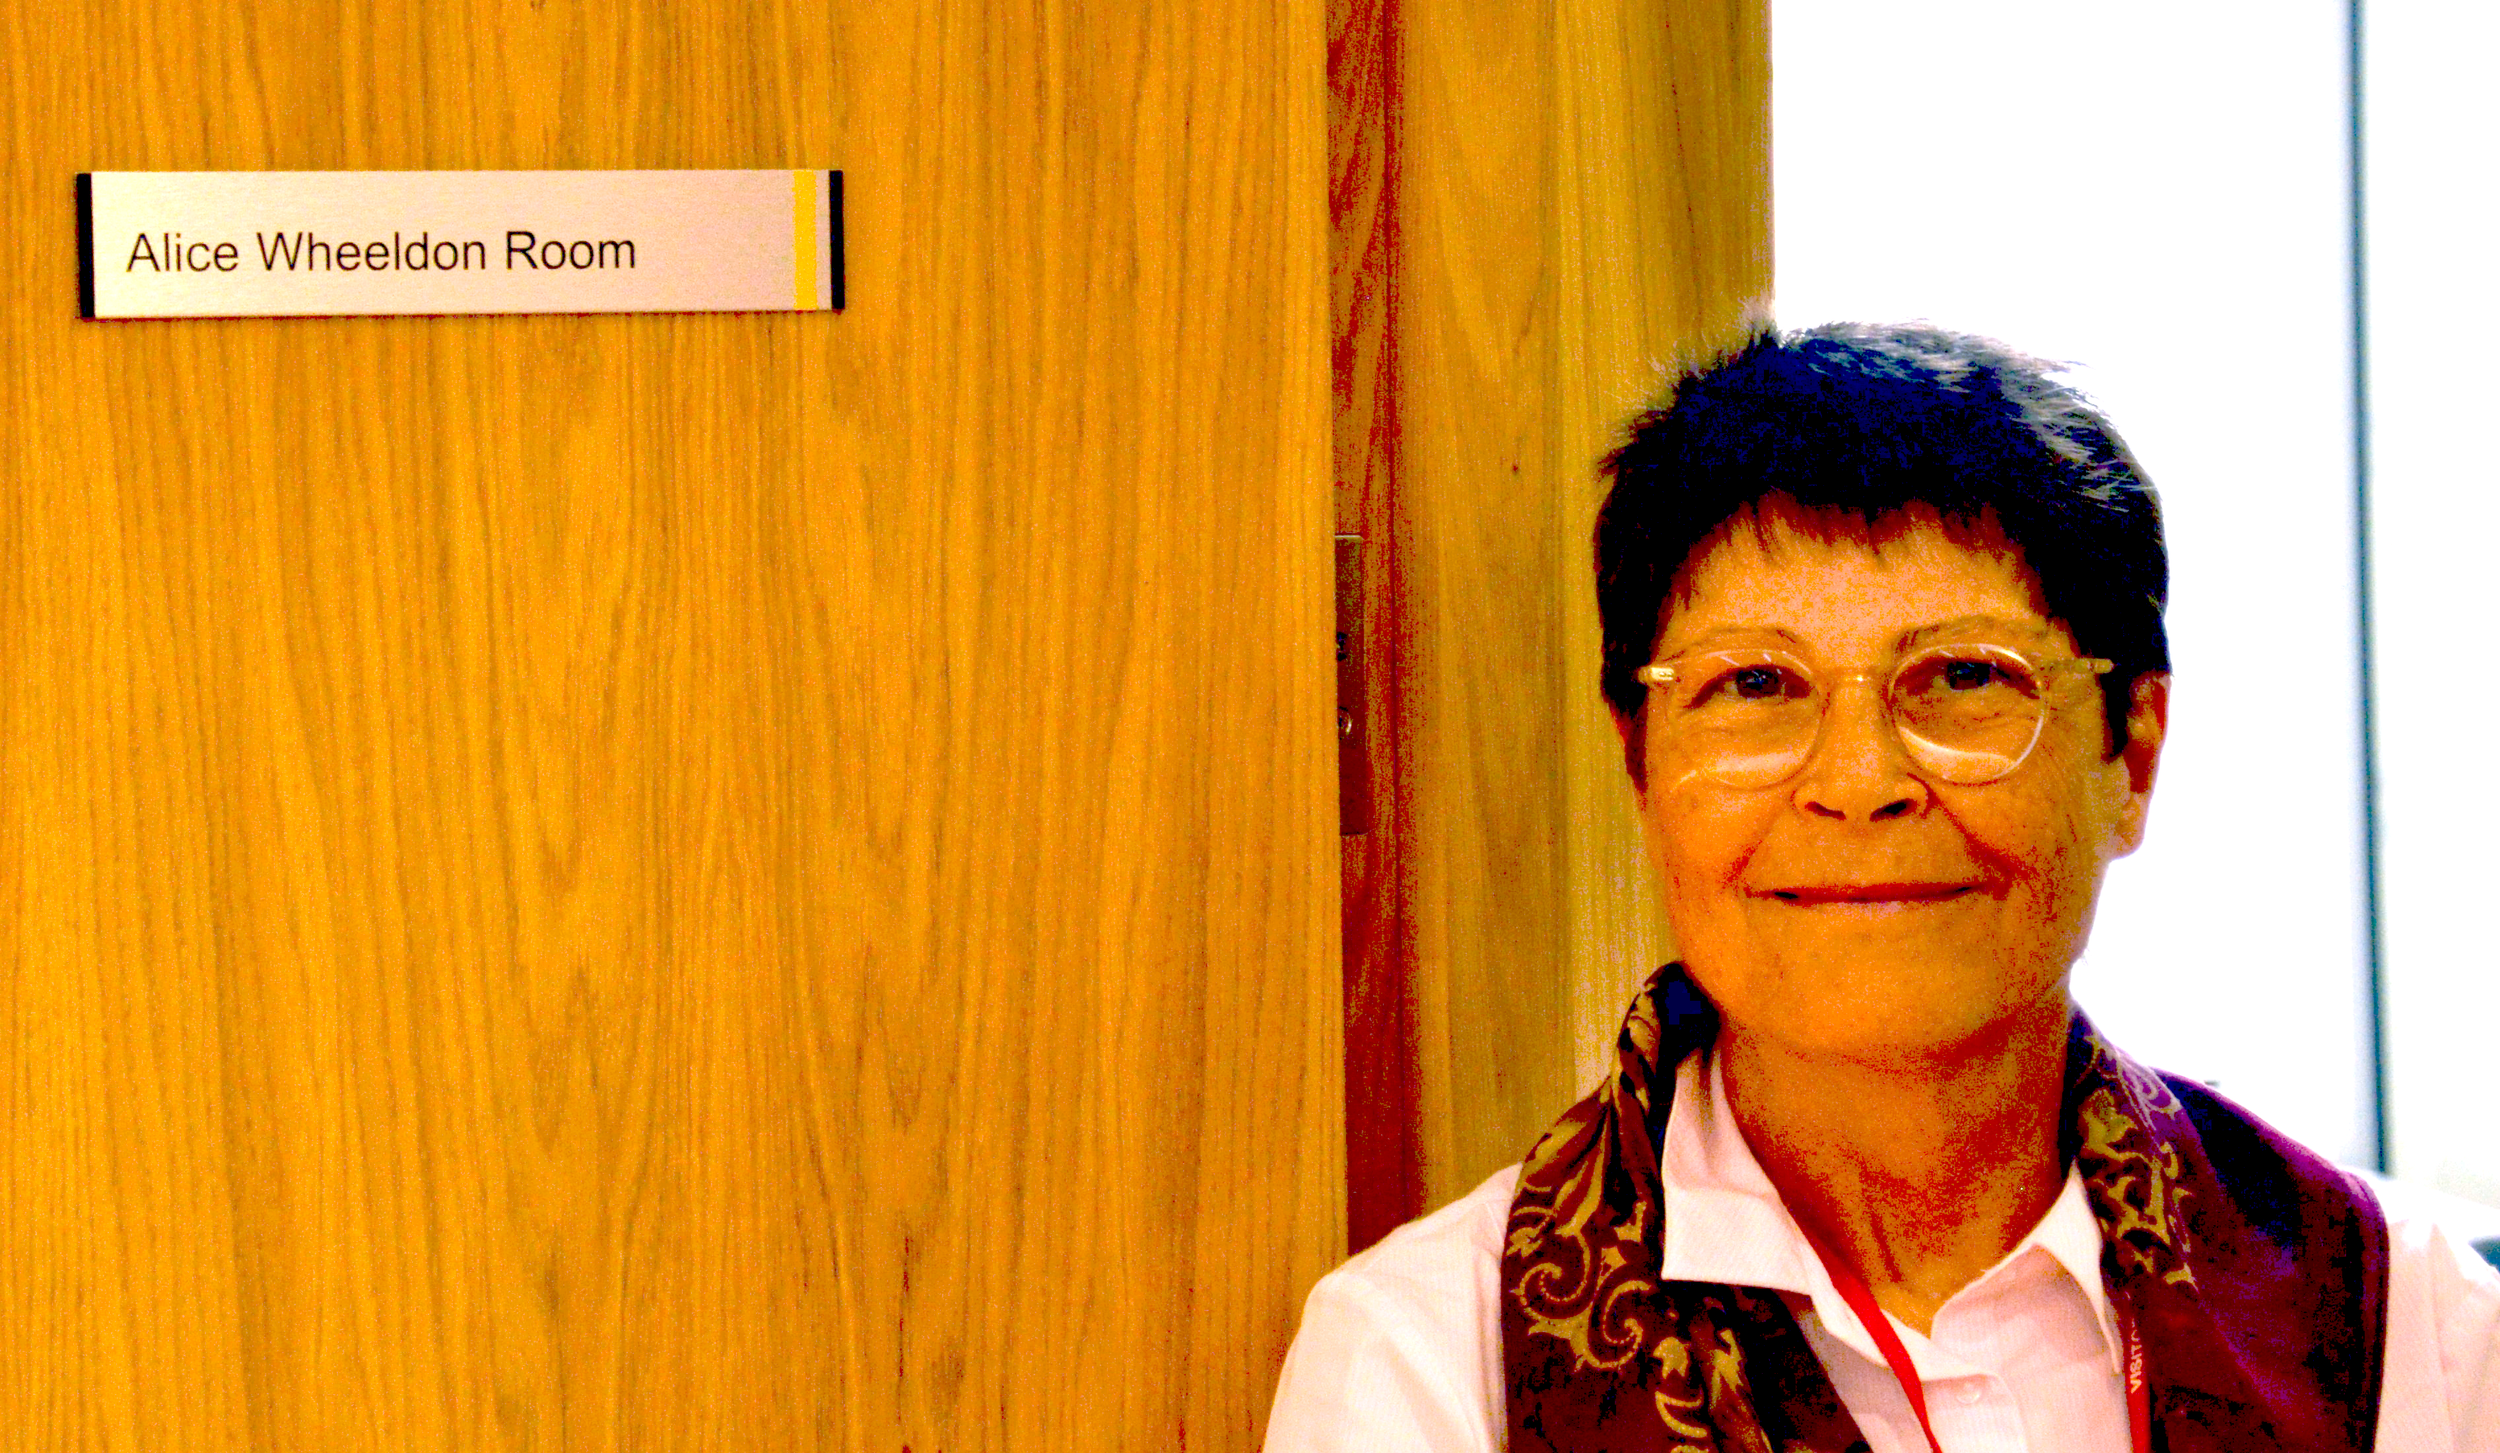  Alice’s great granddaughter, Chloe Mason, stands outside the door to the Alice Wheeldon Room 